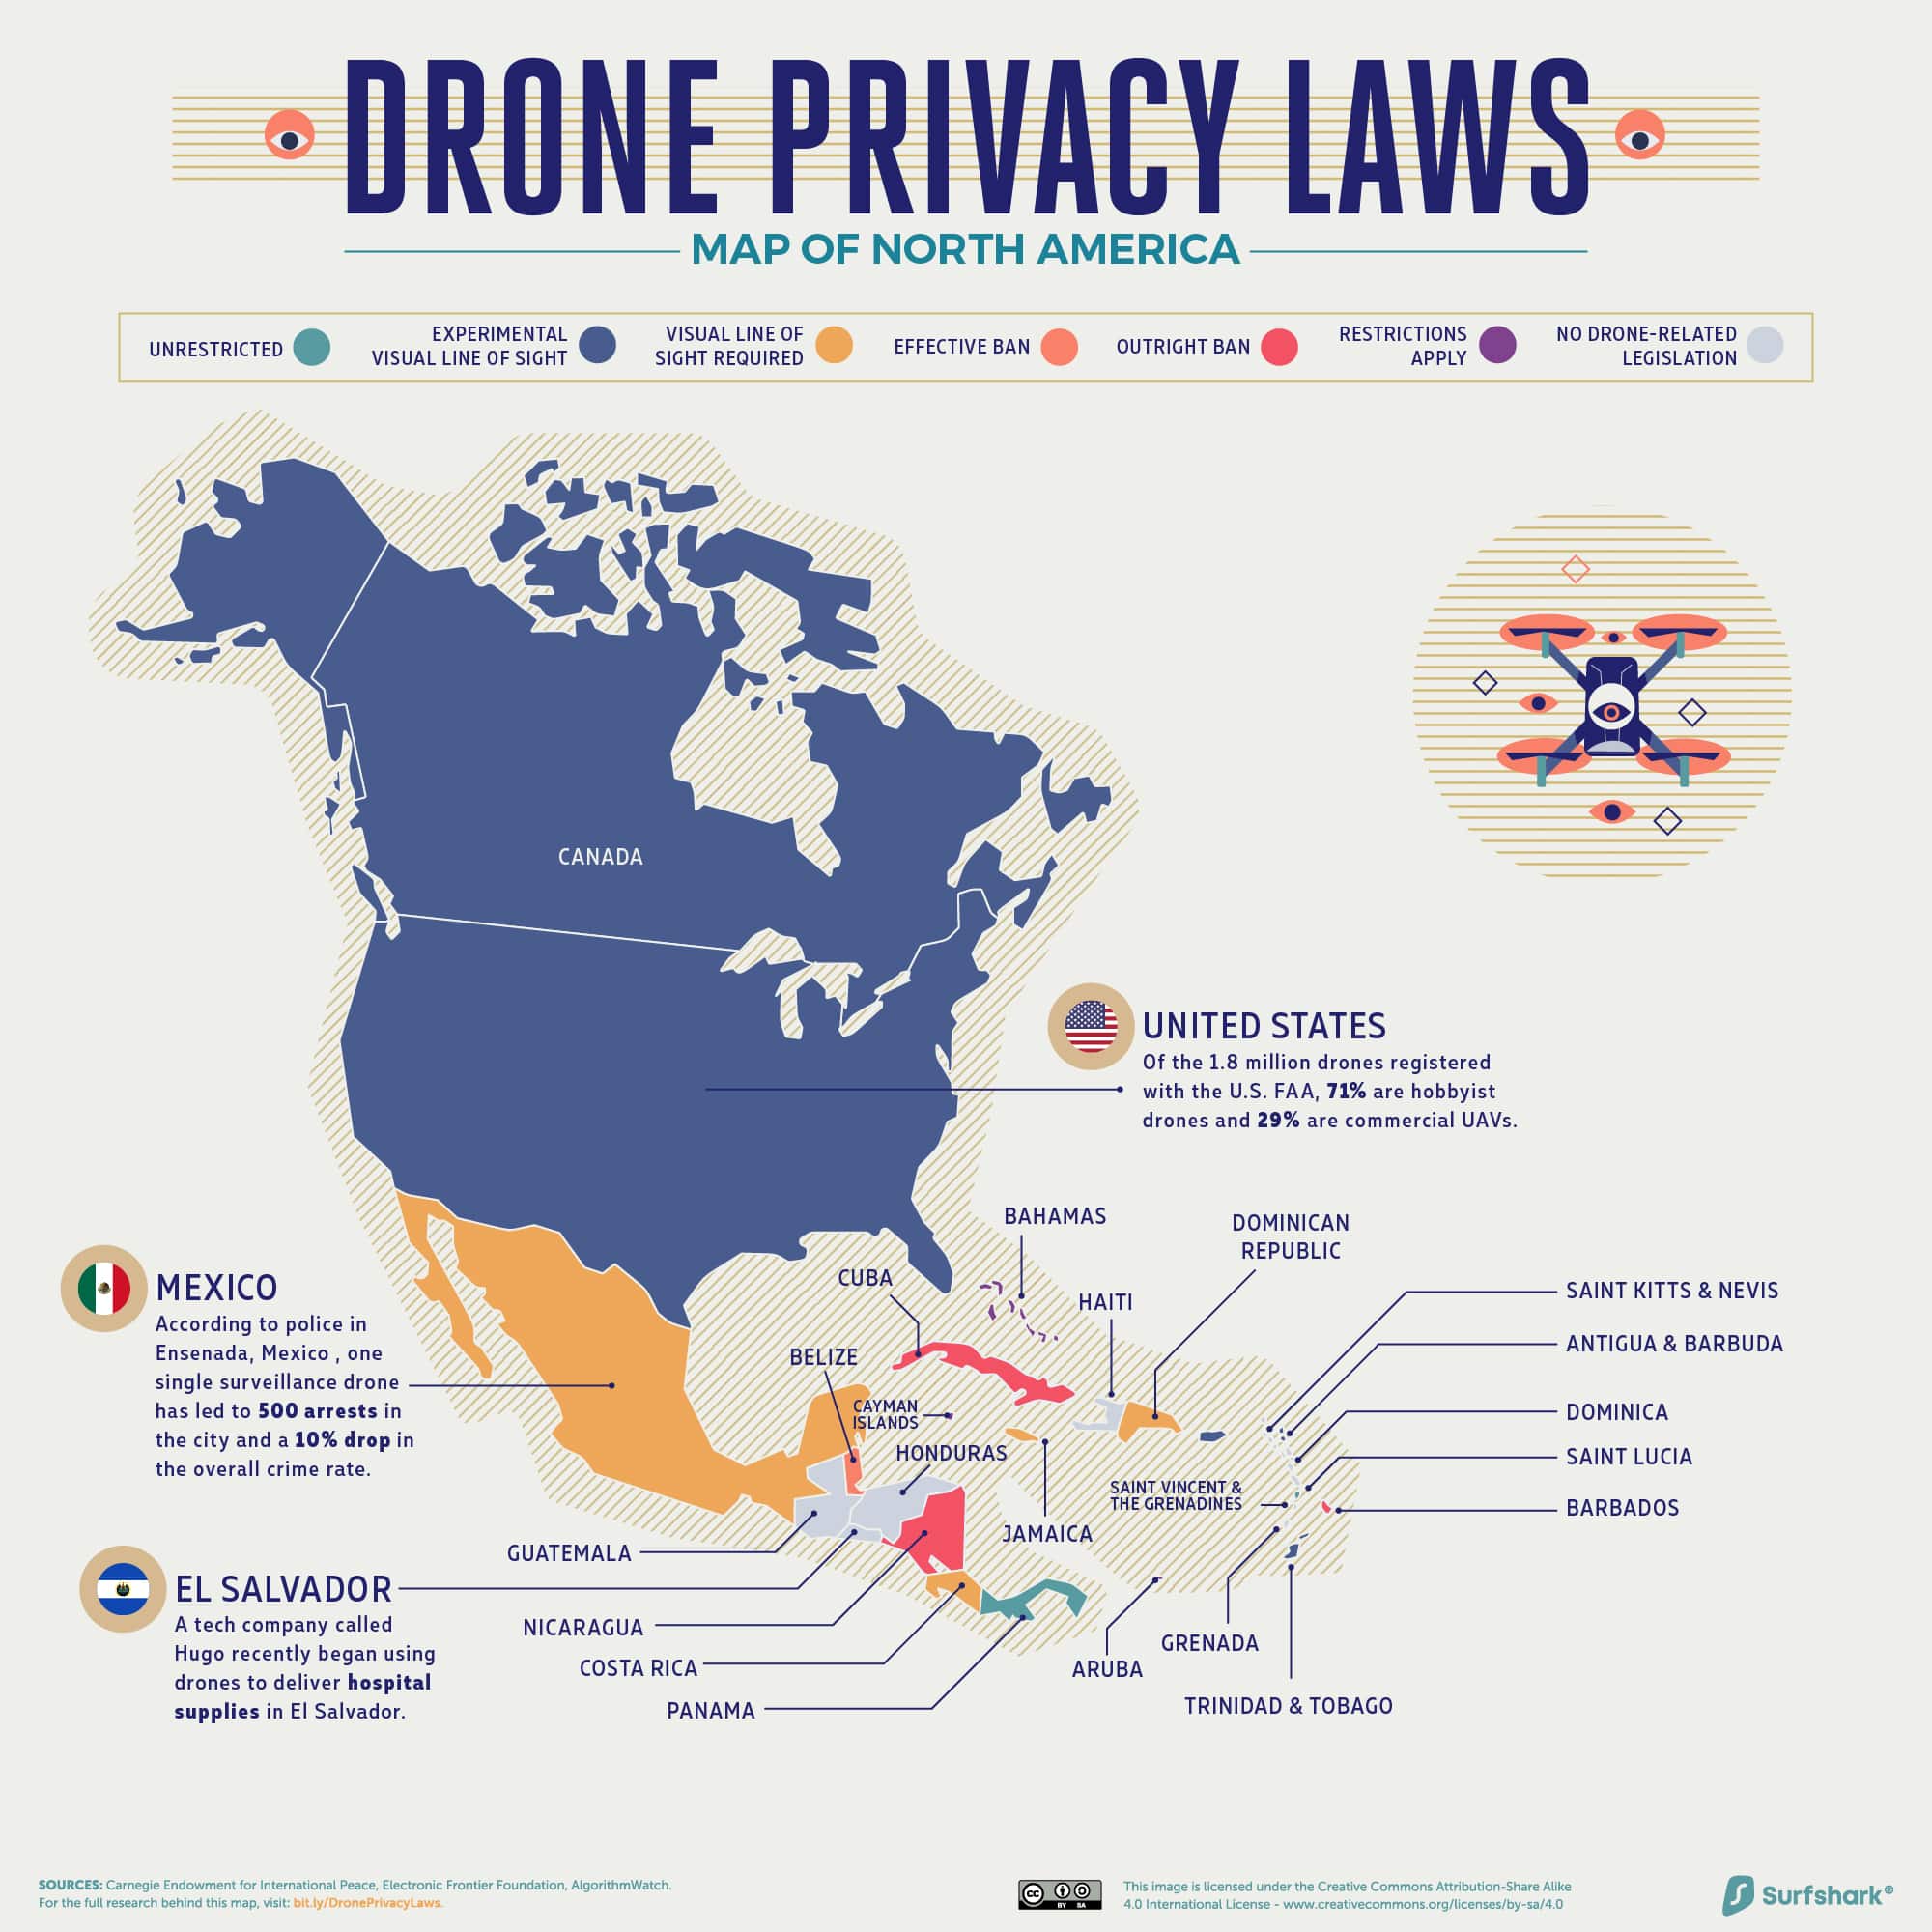 a map of North America with drone privacy laws for each country coded in color